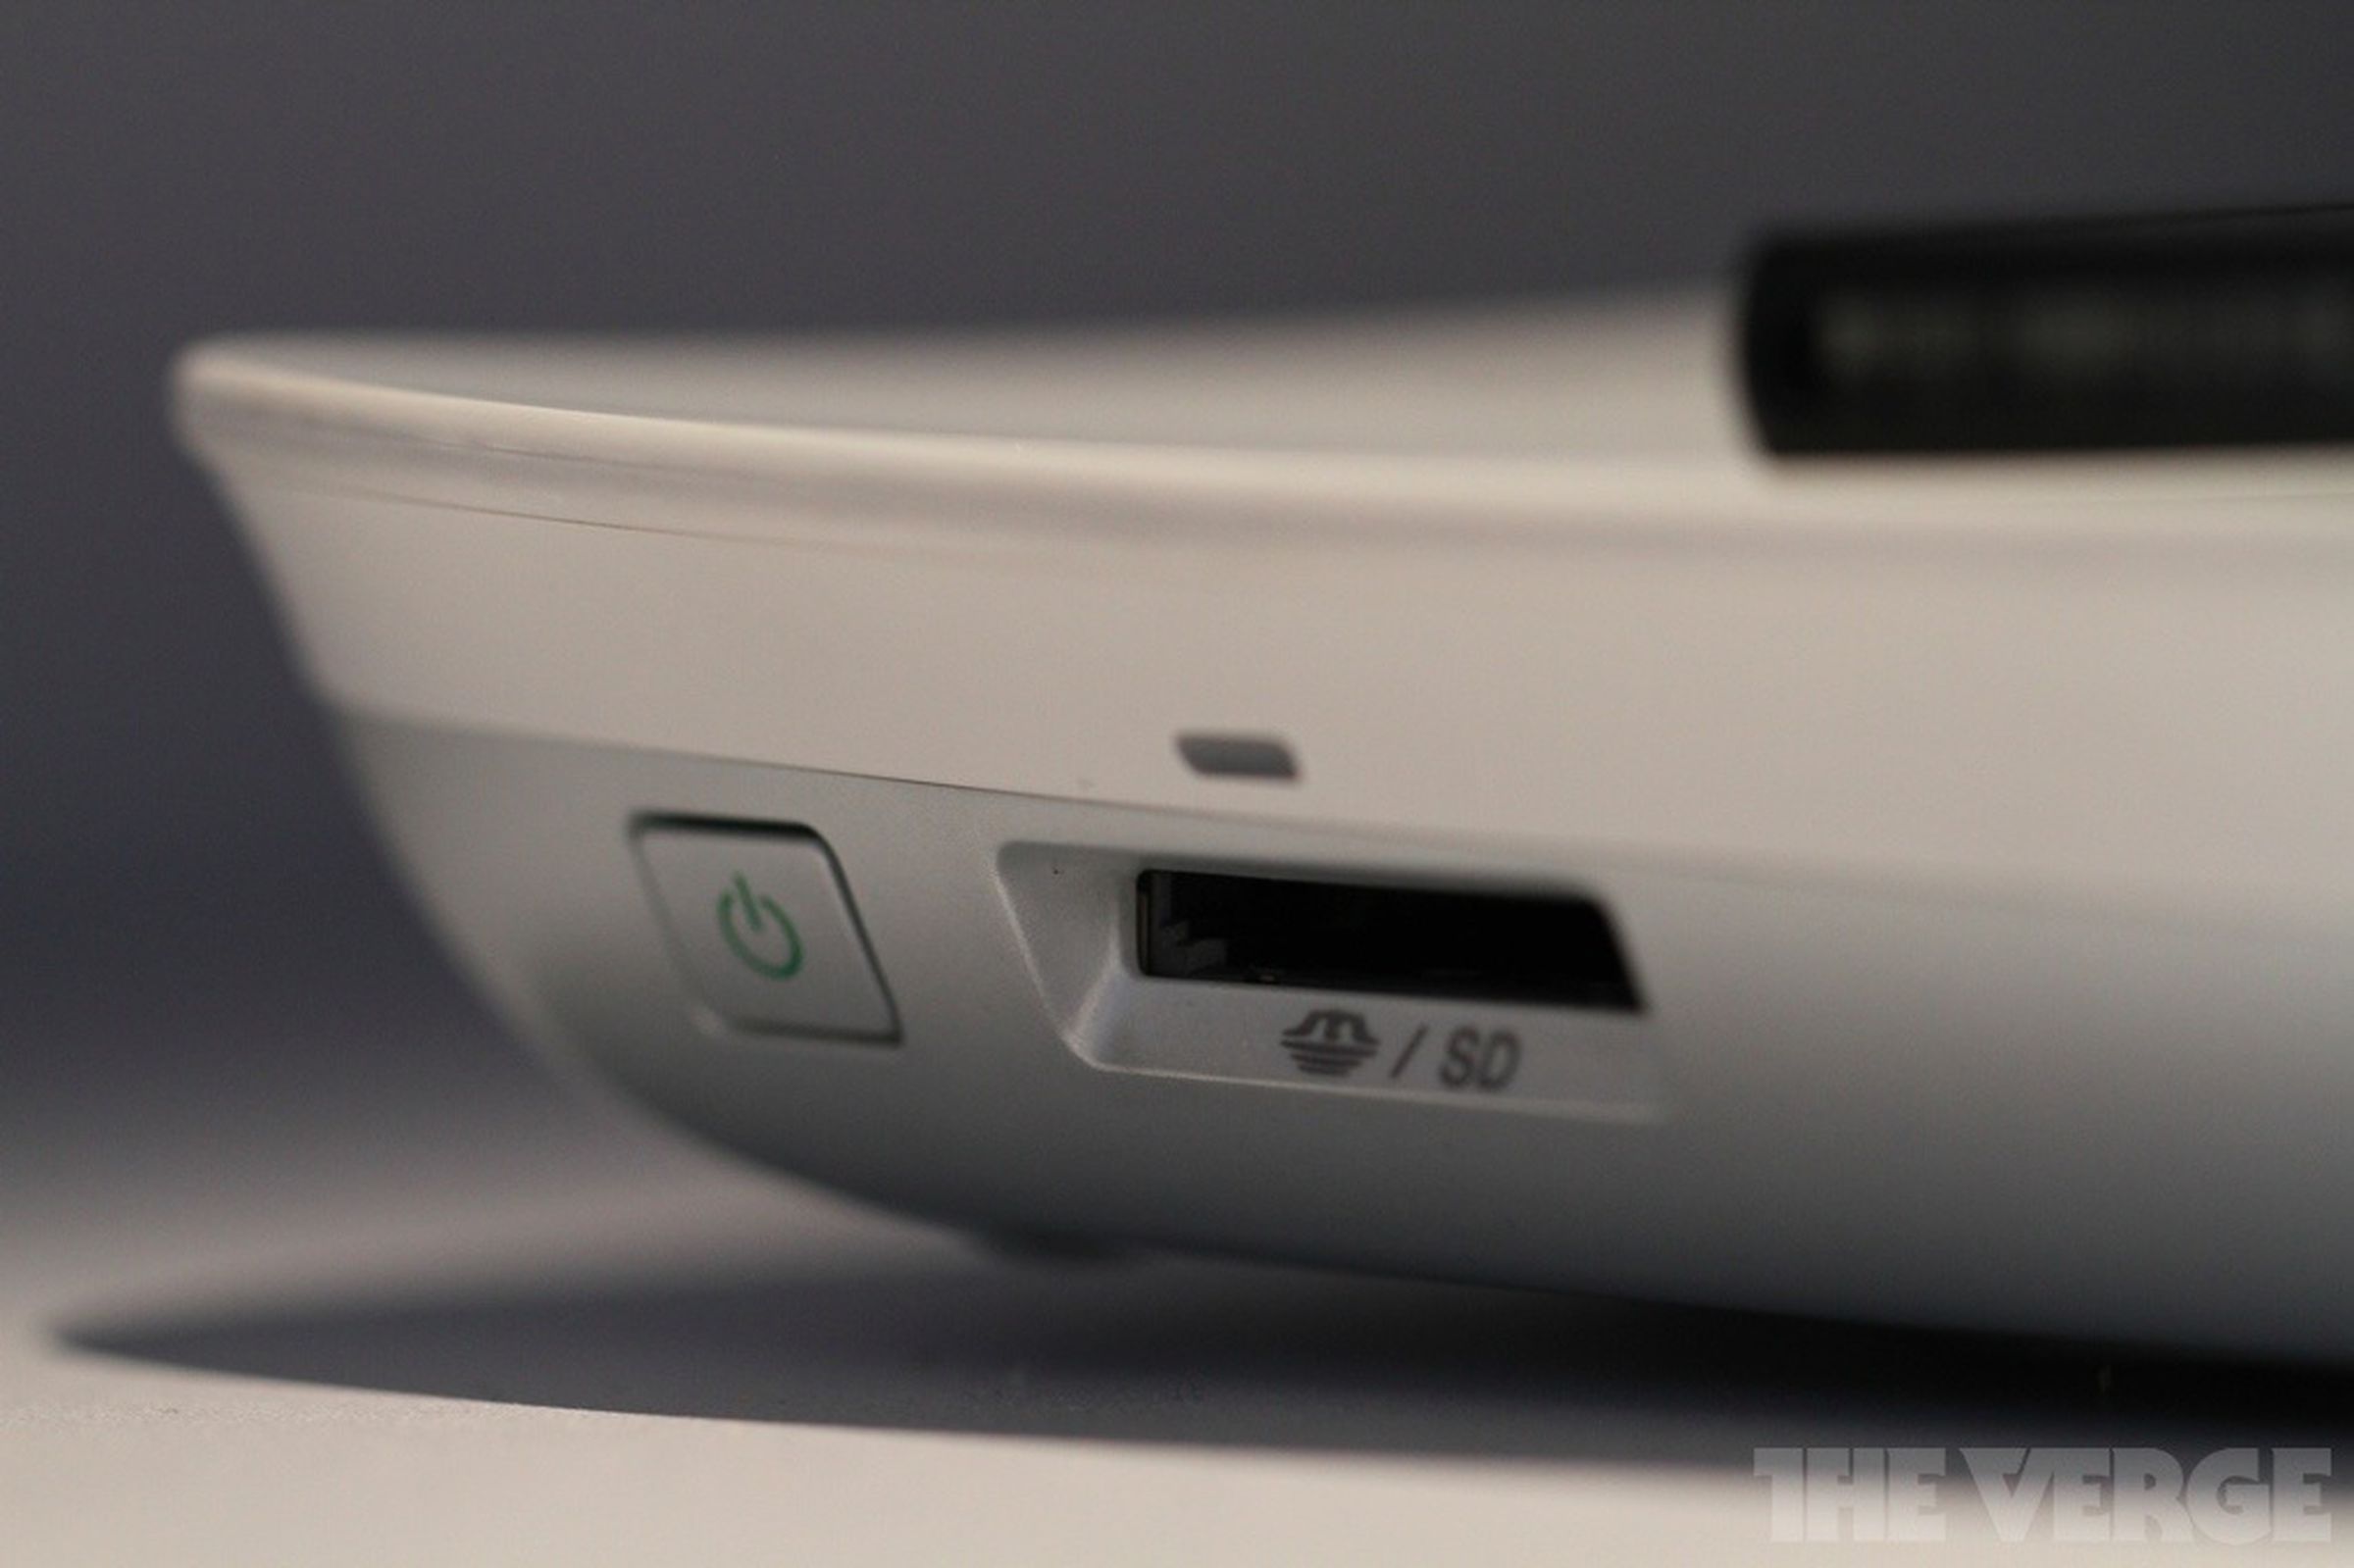 Sony Personal Content Station hands-on photos